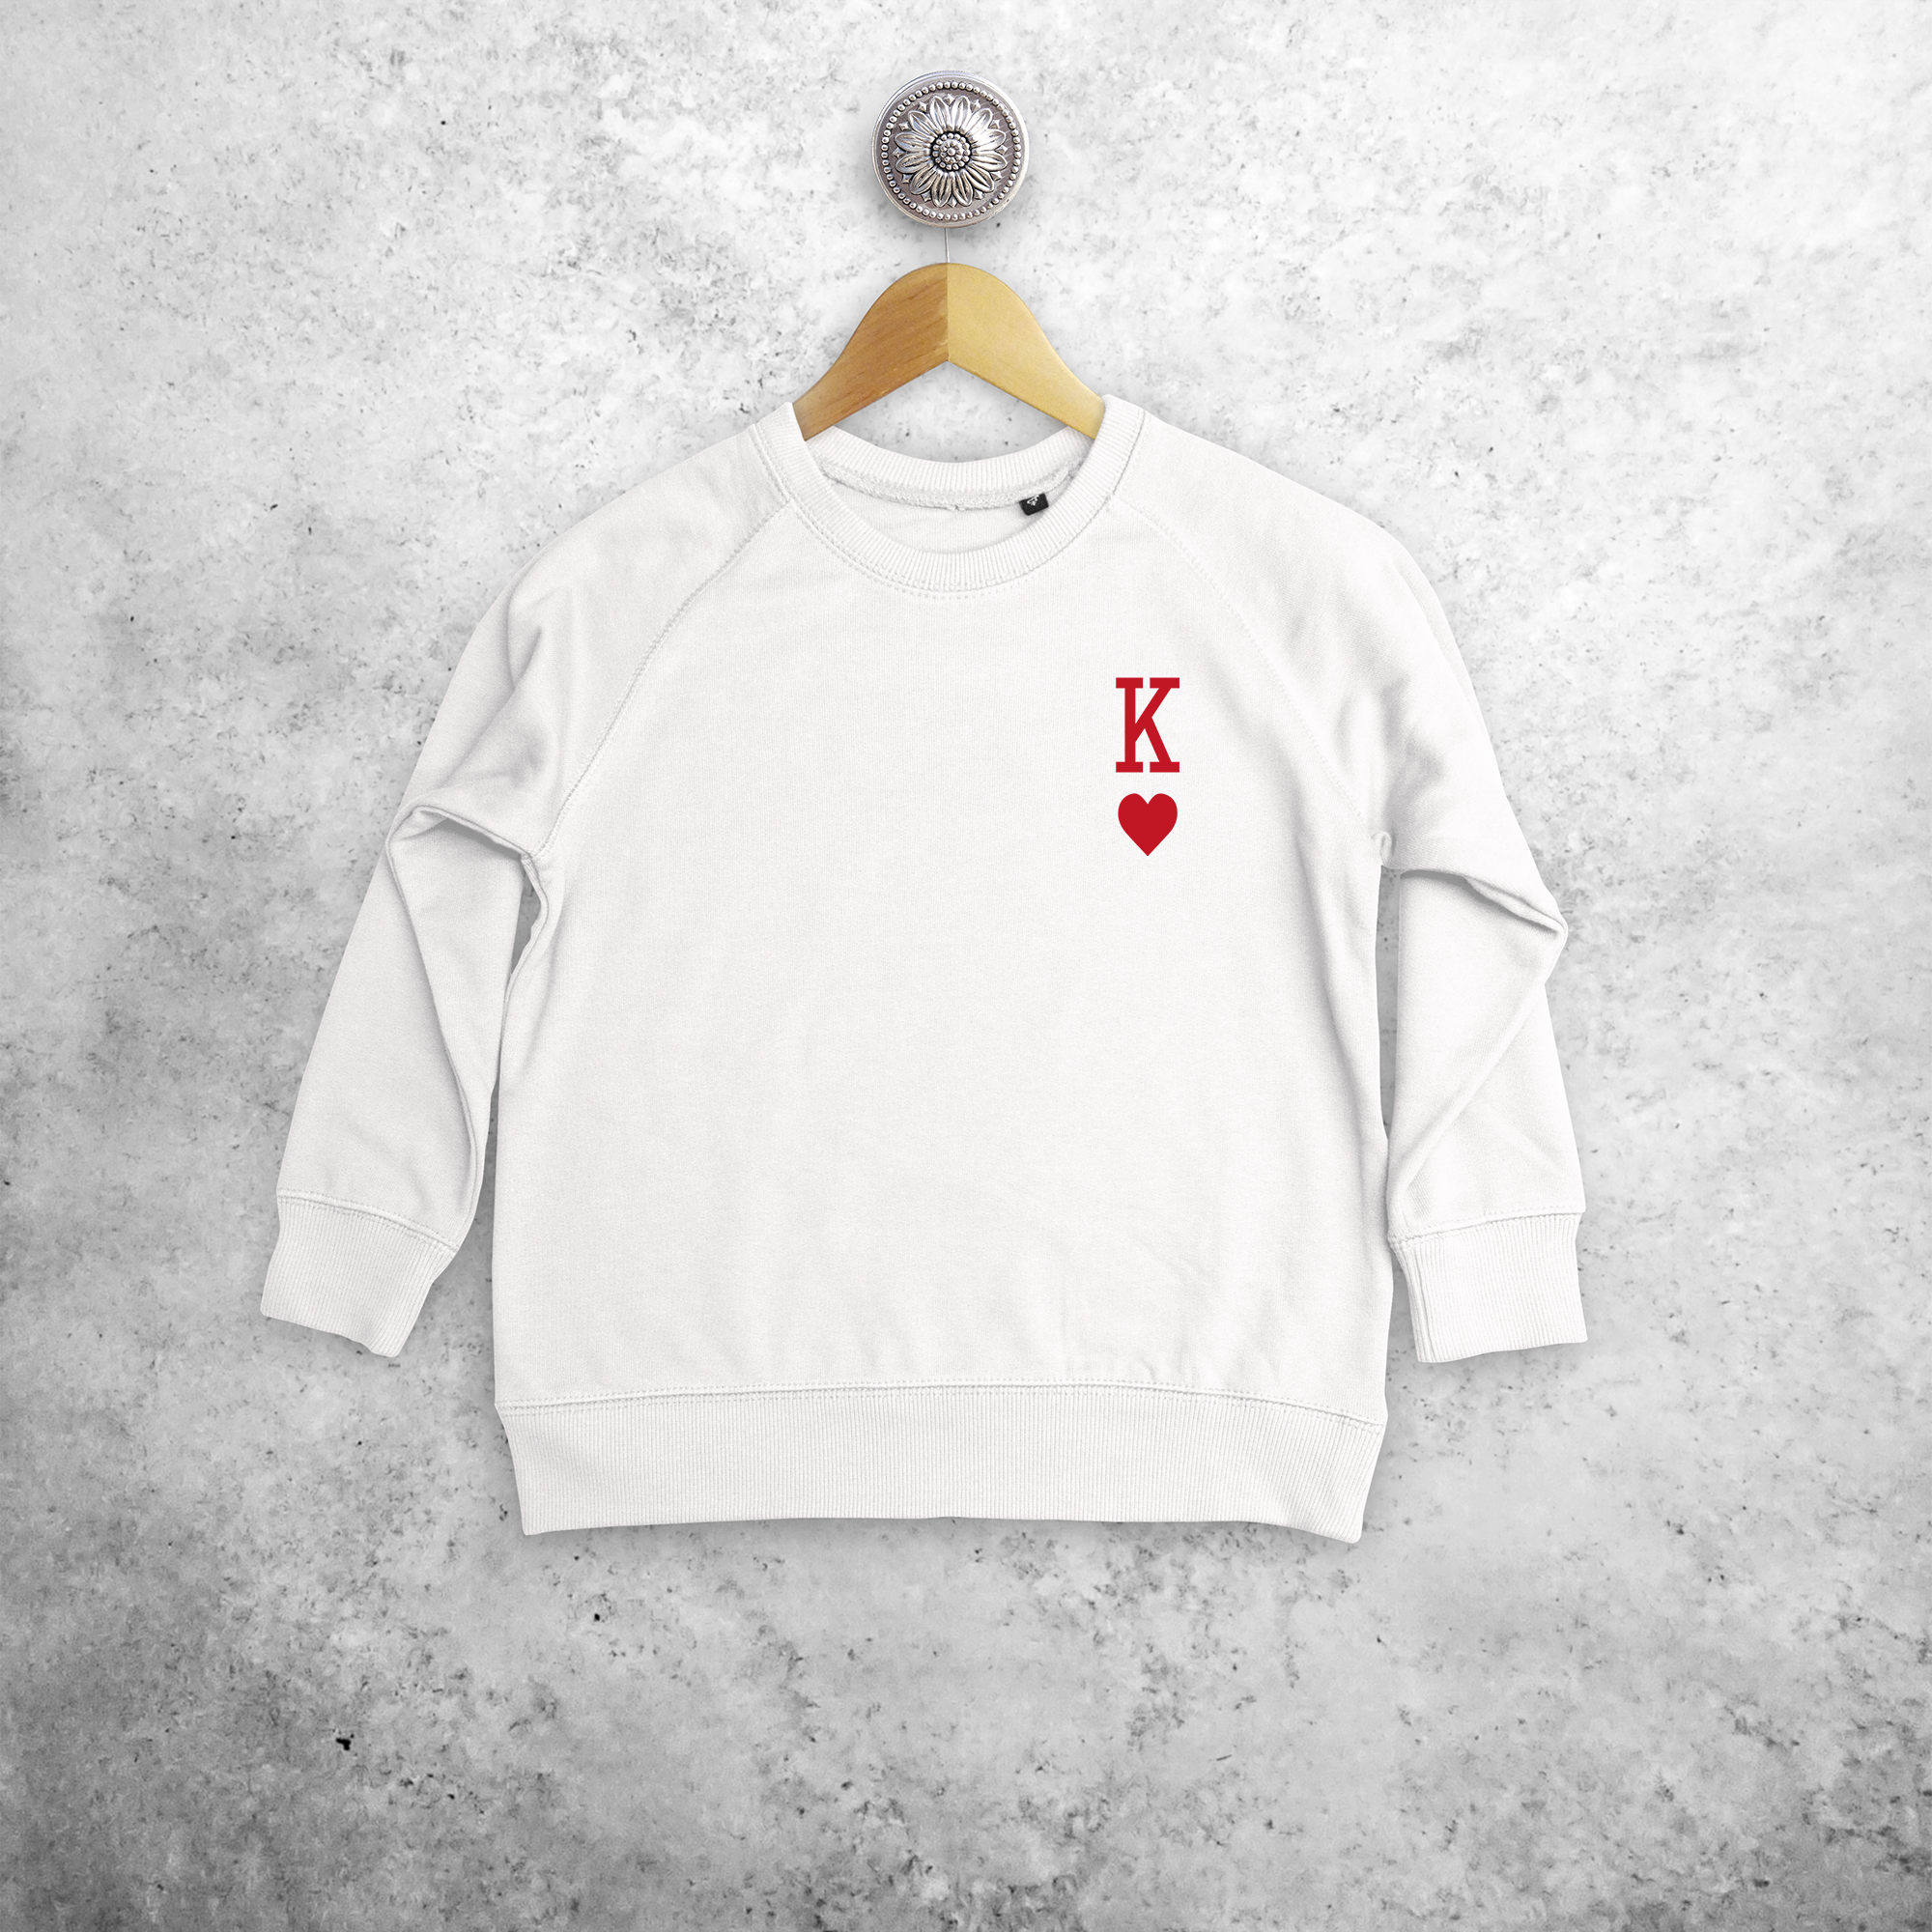 'King of hearts' kids sweater